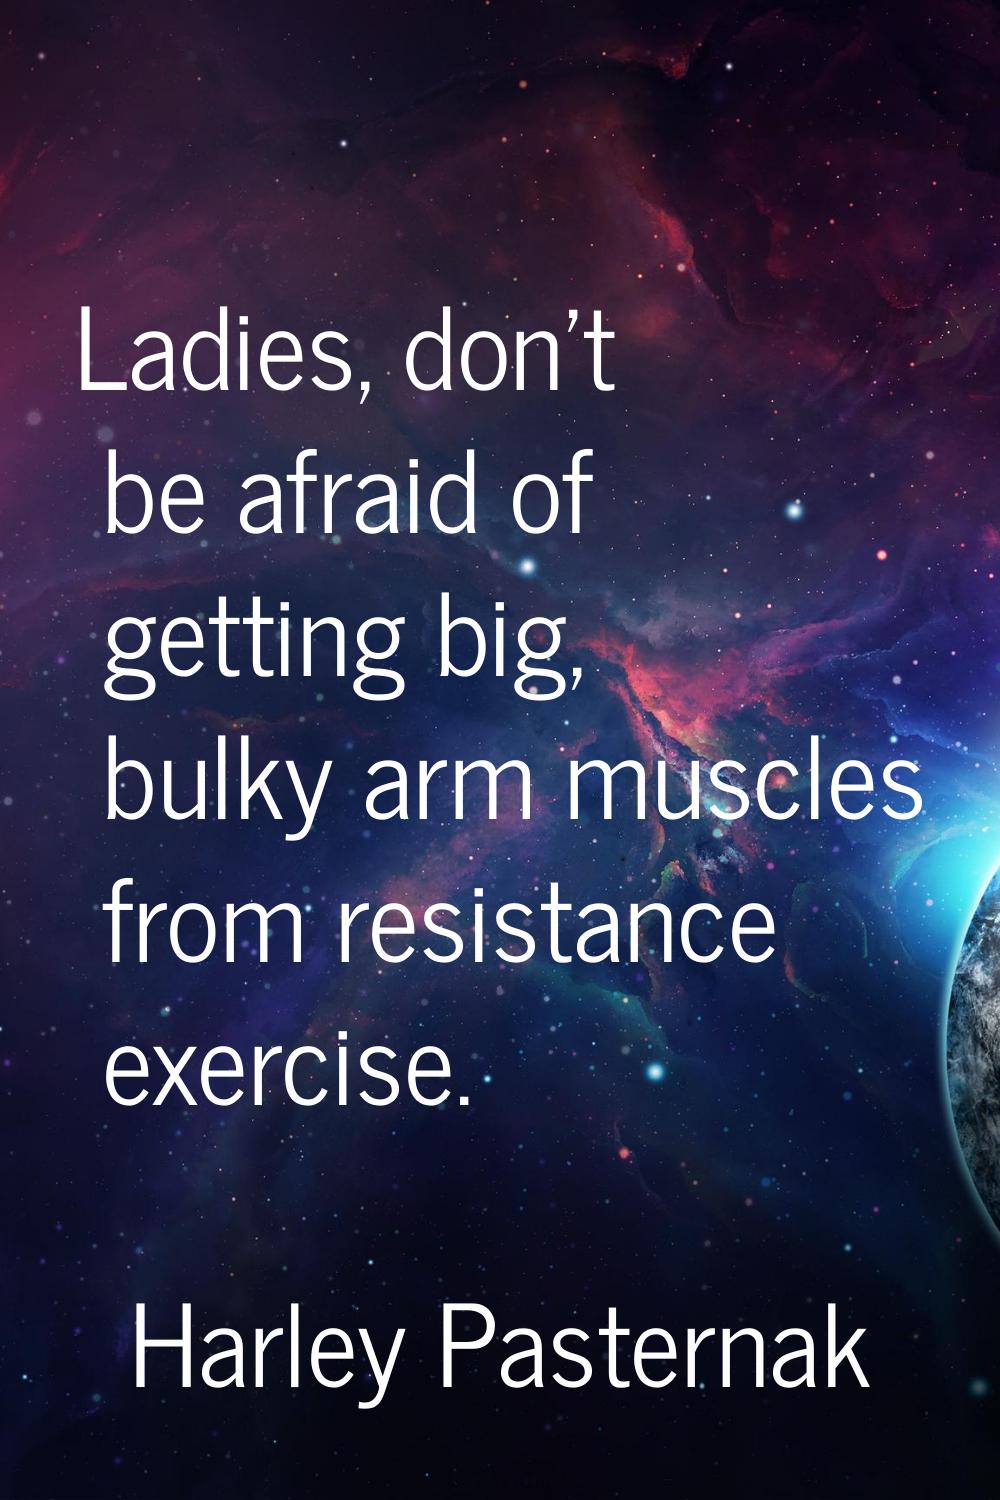 Ladies, don't be afraid of getting big, bulky arm muscles from resistance exercise.